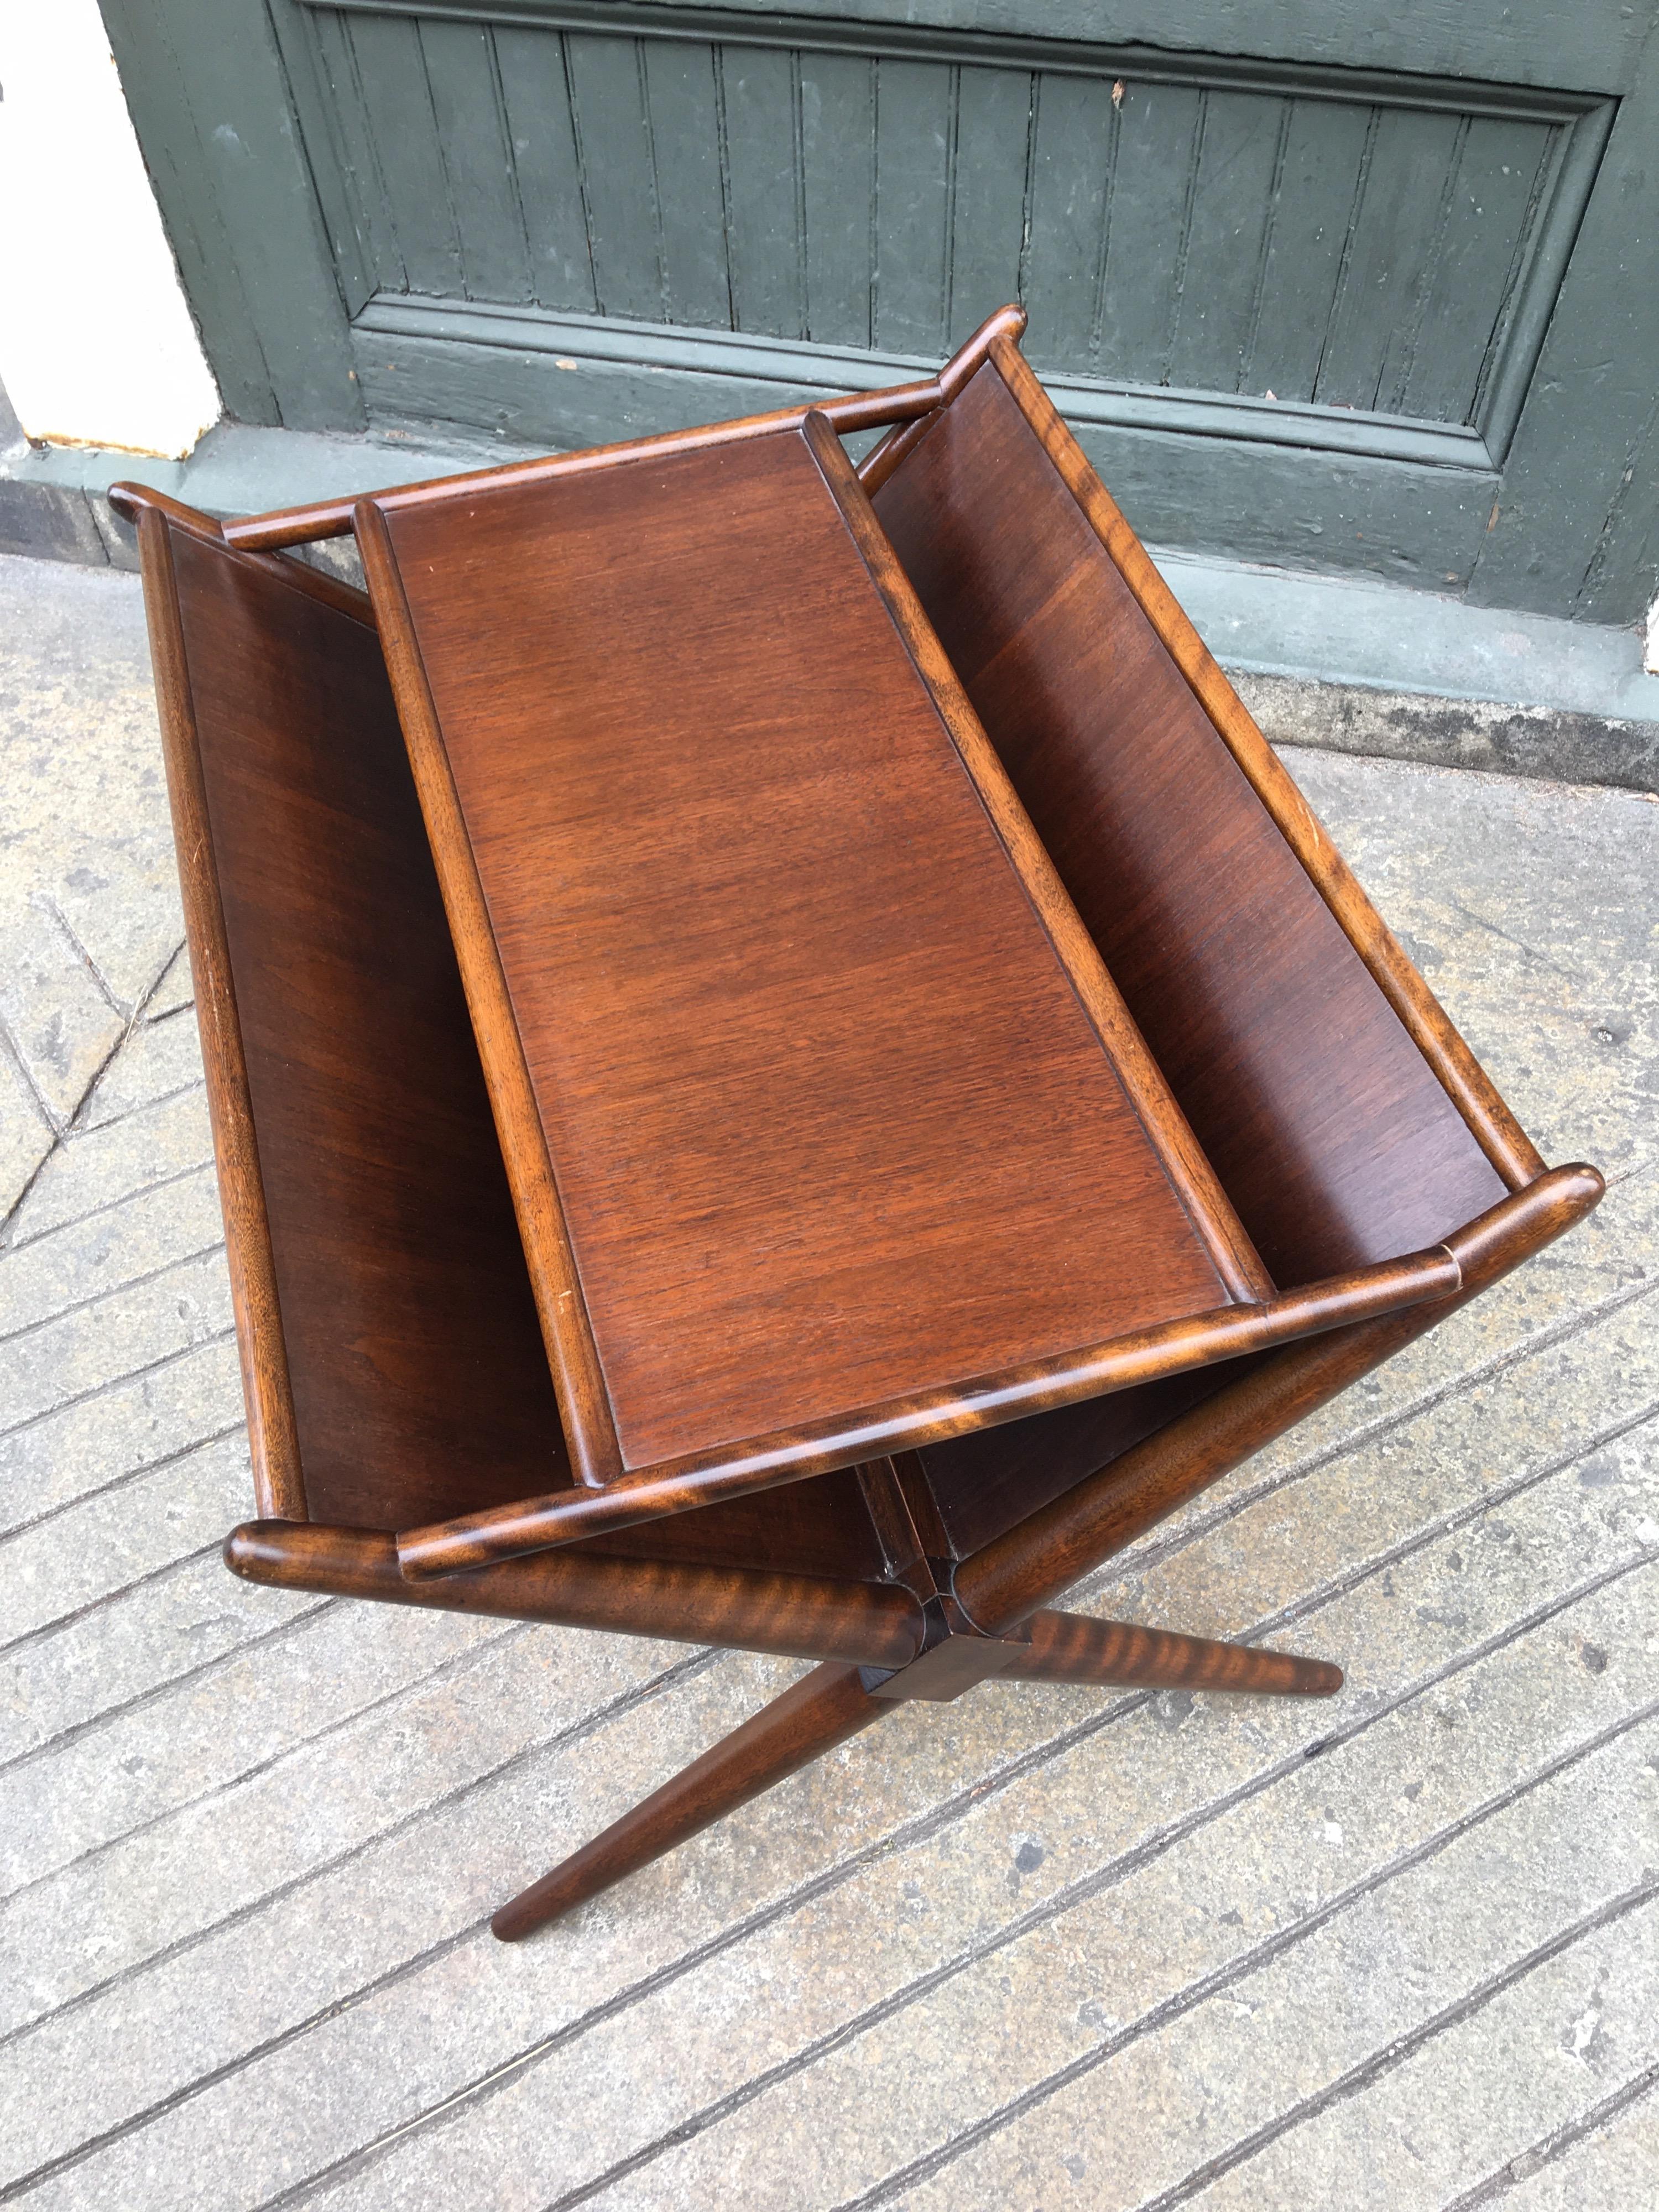 Versatile designed magazine table by T.H. Robbsjohn Gibbings for Widdicomb Furnture. Two angled panels allow for magazines and newspapers to be stored on sides with an ample top surface for a lamp. Very clean walnut finish, looks like it has been